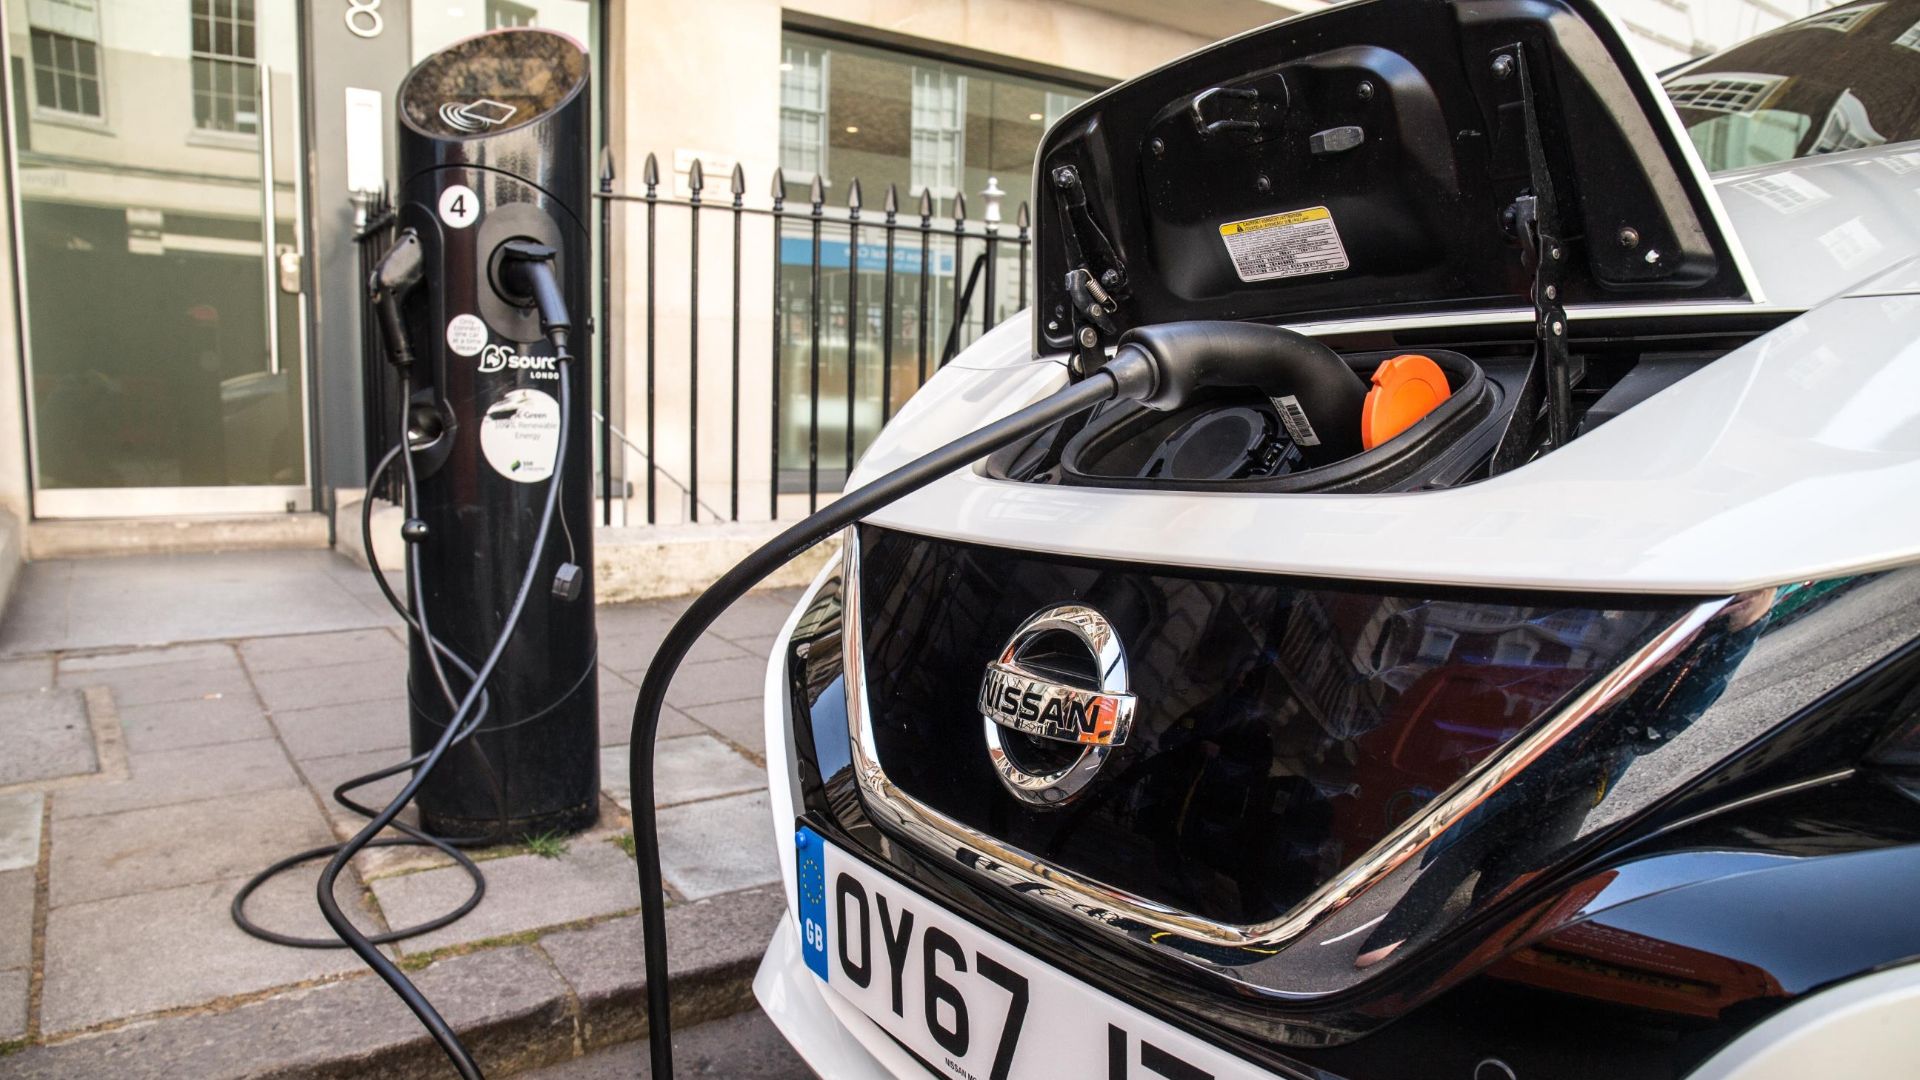 10,000 charging locations in the UK